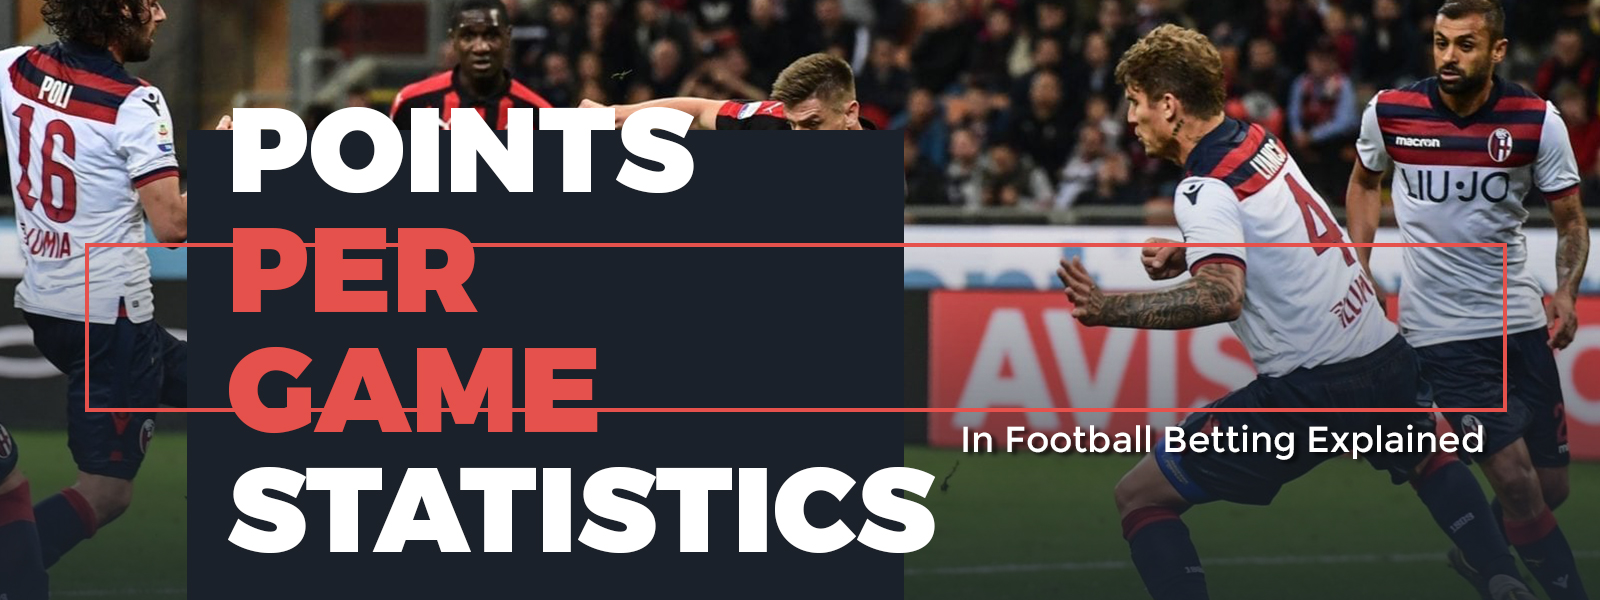 Points Per Game Statistics In Football Betting Explained